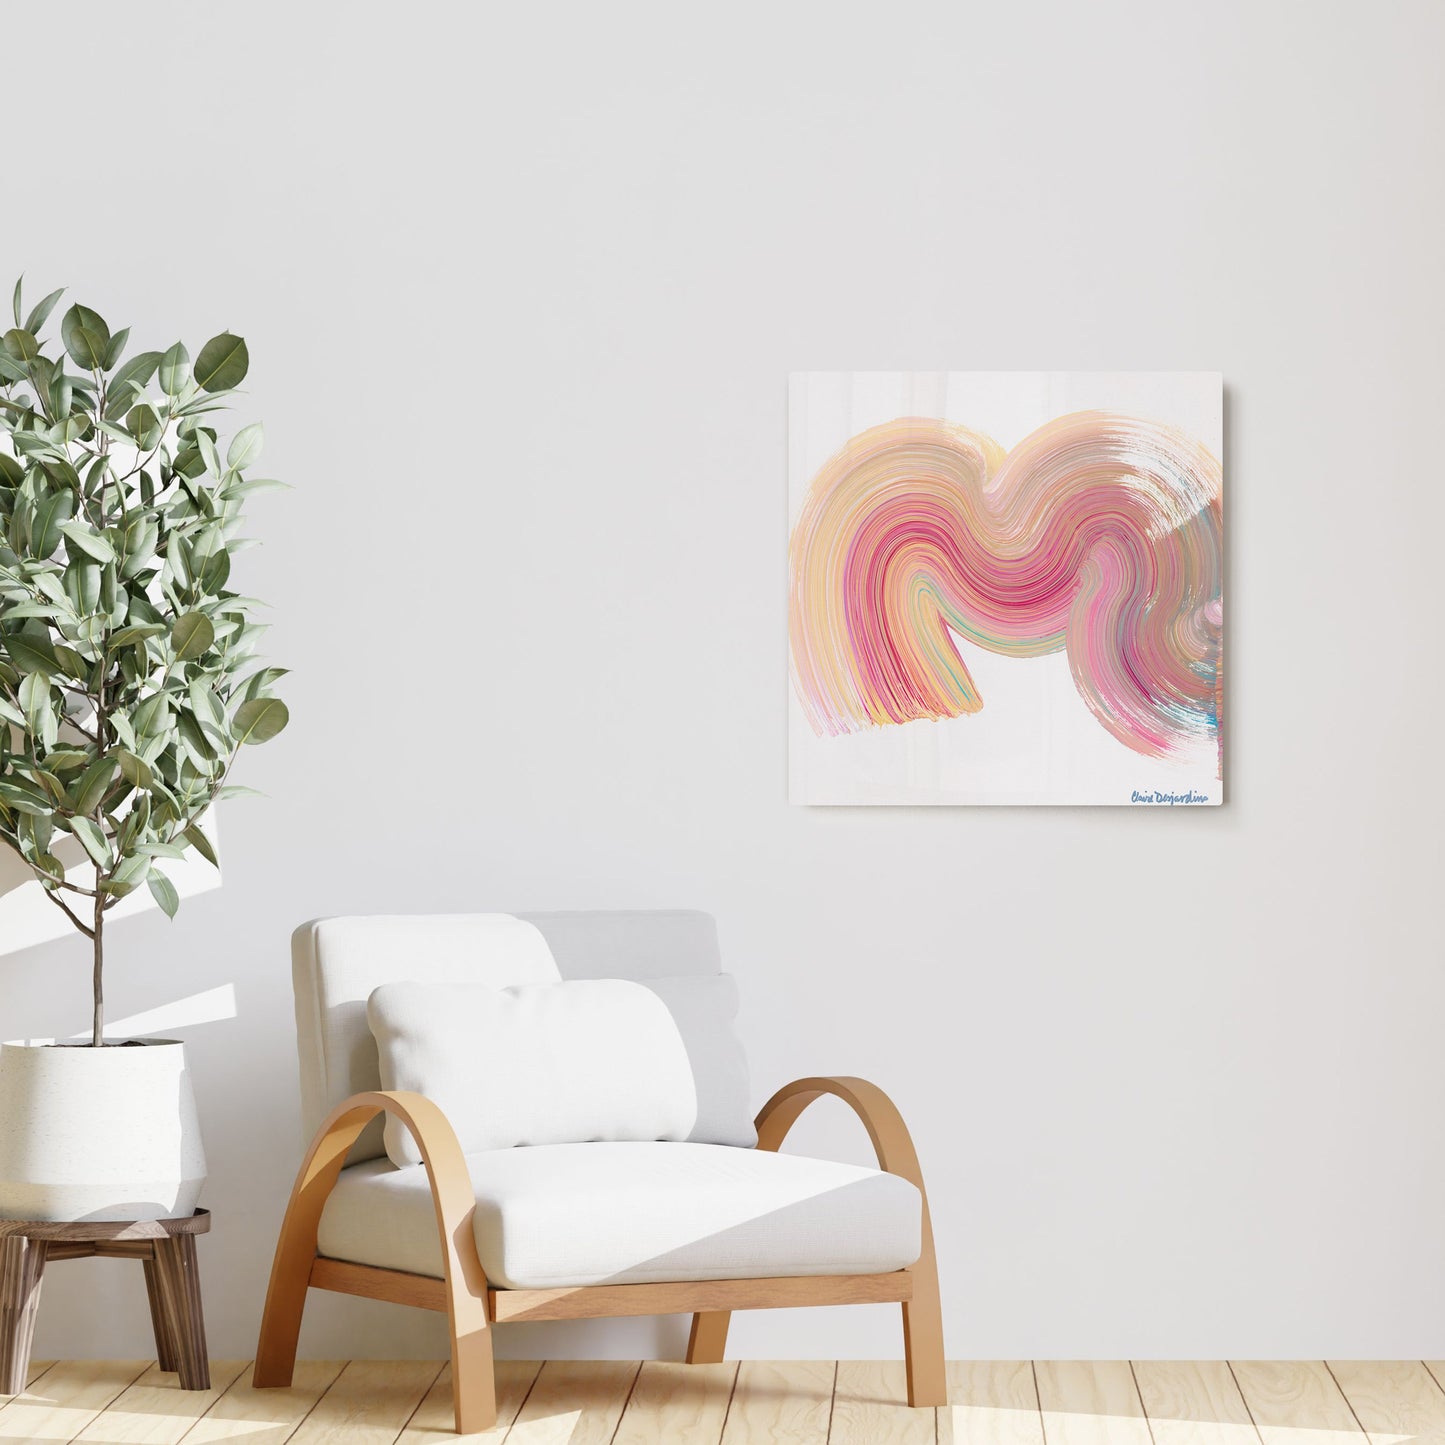 Claire Desjardins' Whoah Mama painting reproduced on HD metal print and displayed on wall